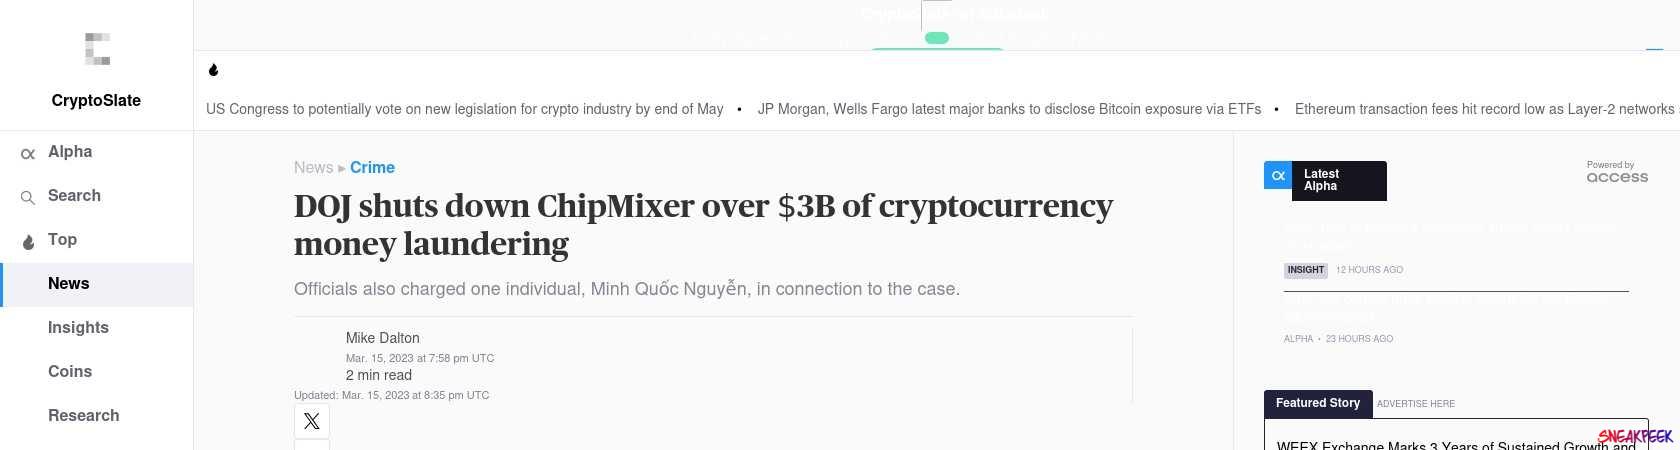 Read the full Article:  ⭲ DOJ shuts down ChipMixer over $3B of cryptocurrency money laundering